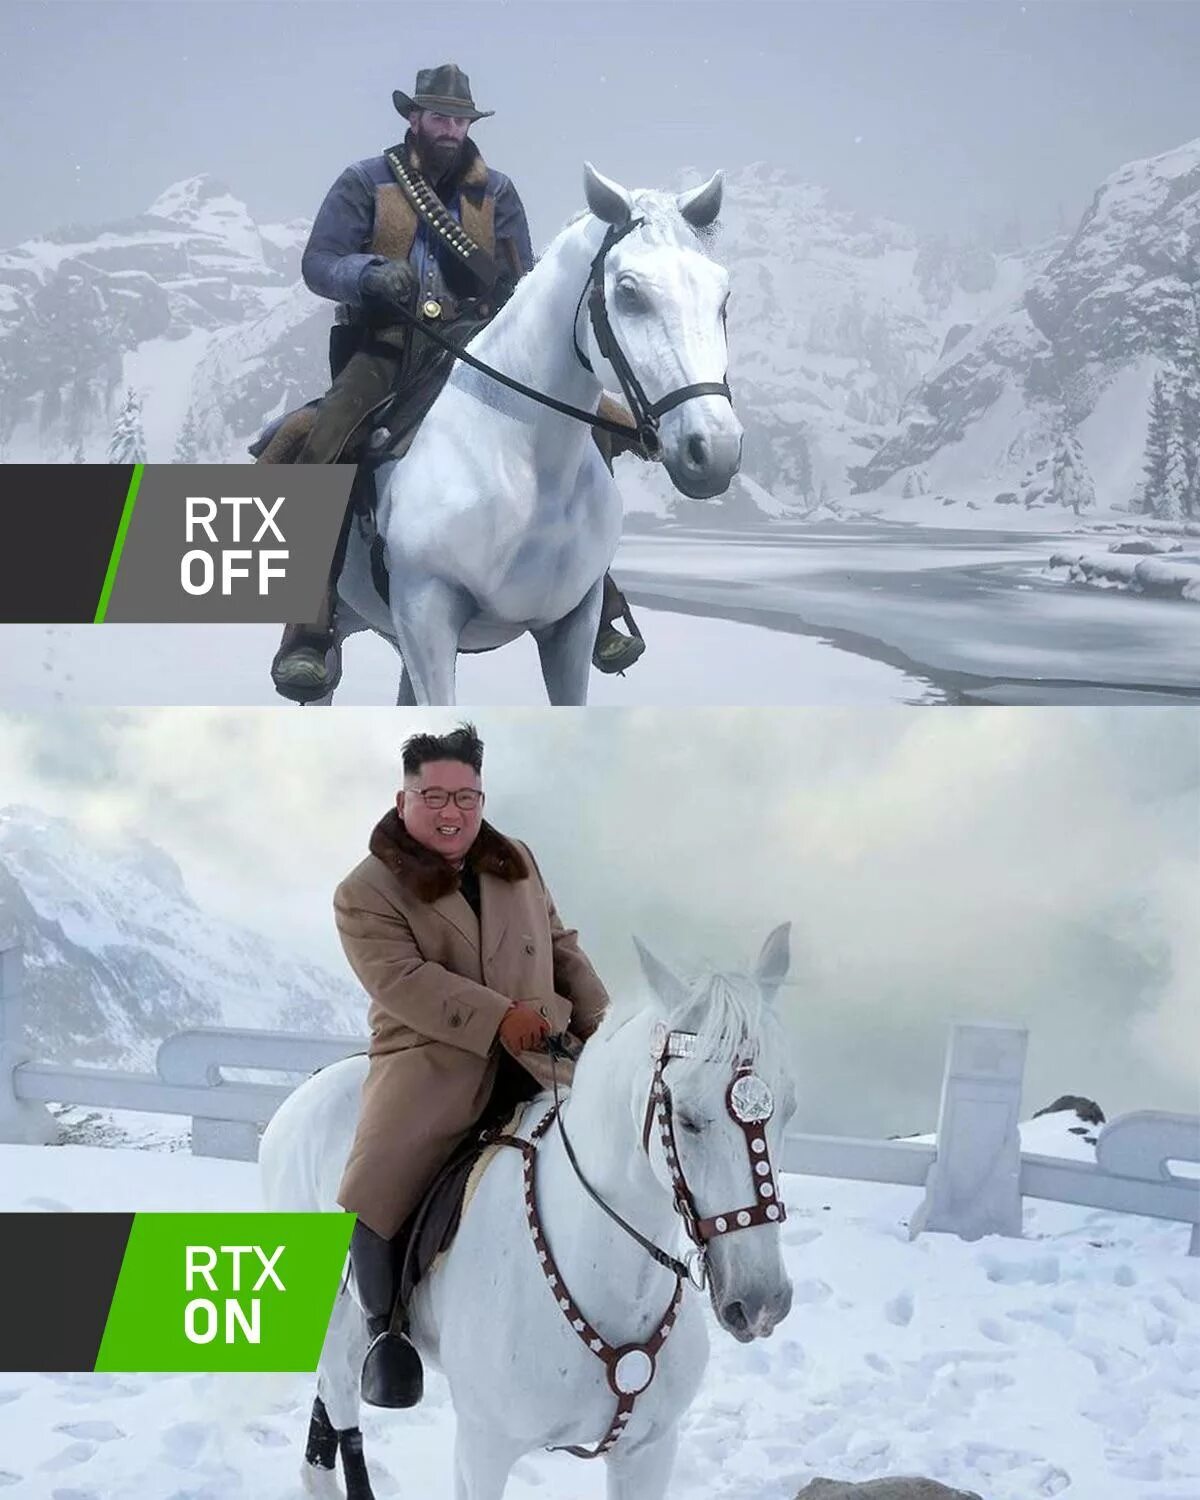 Rdr 2 RTX. Red Dead Redemption 2 RTX. Rdr2 RTX on off. Rdr 2 RTX on RTX off.